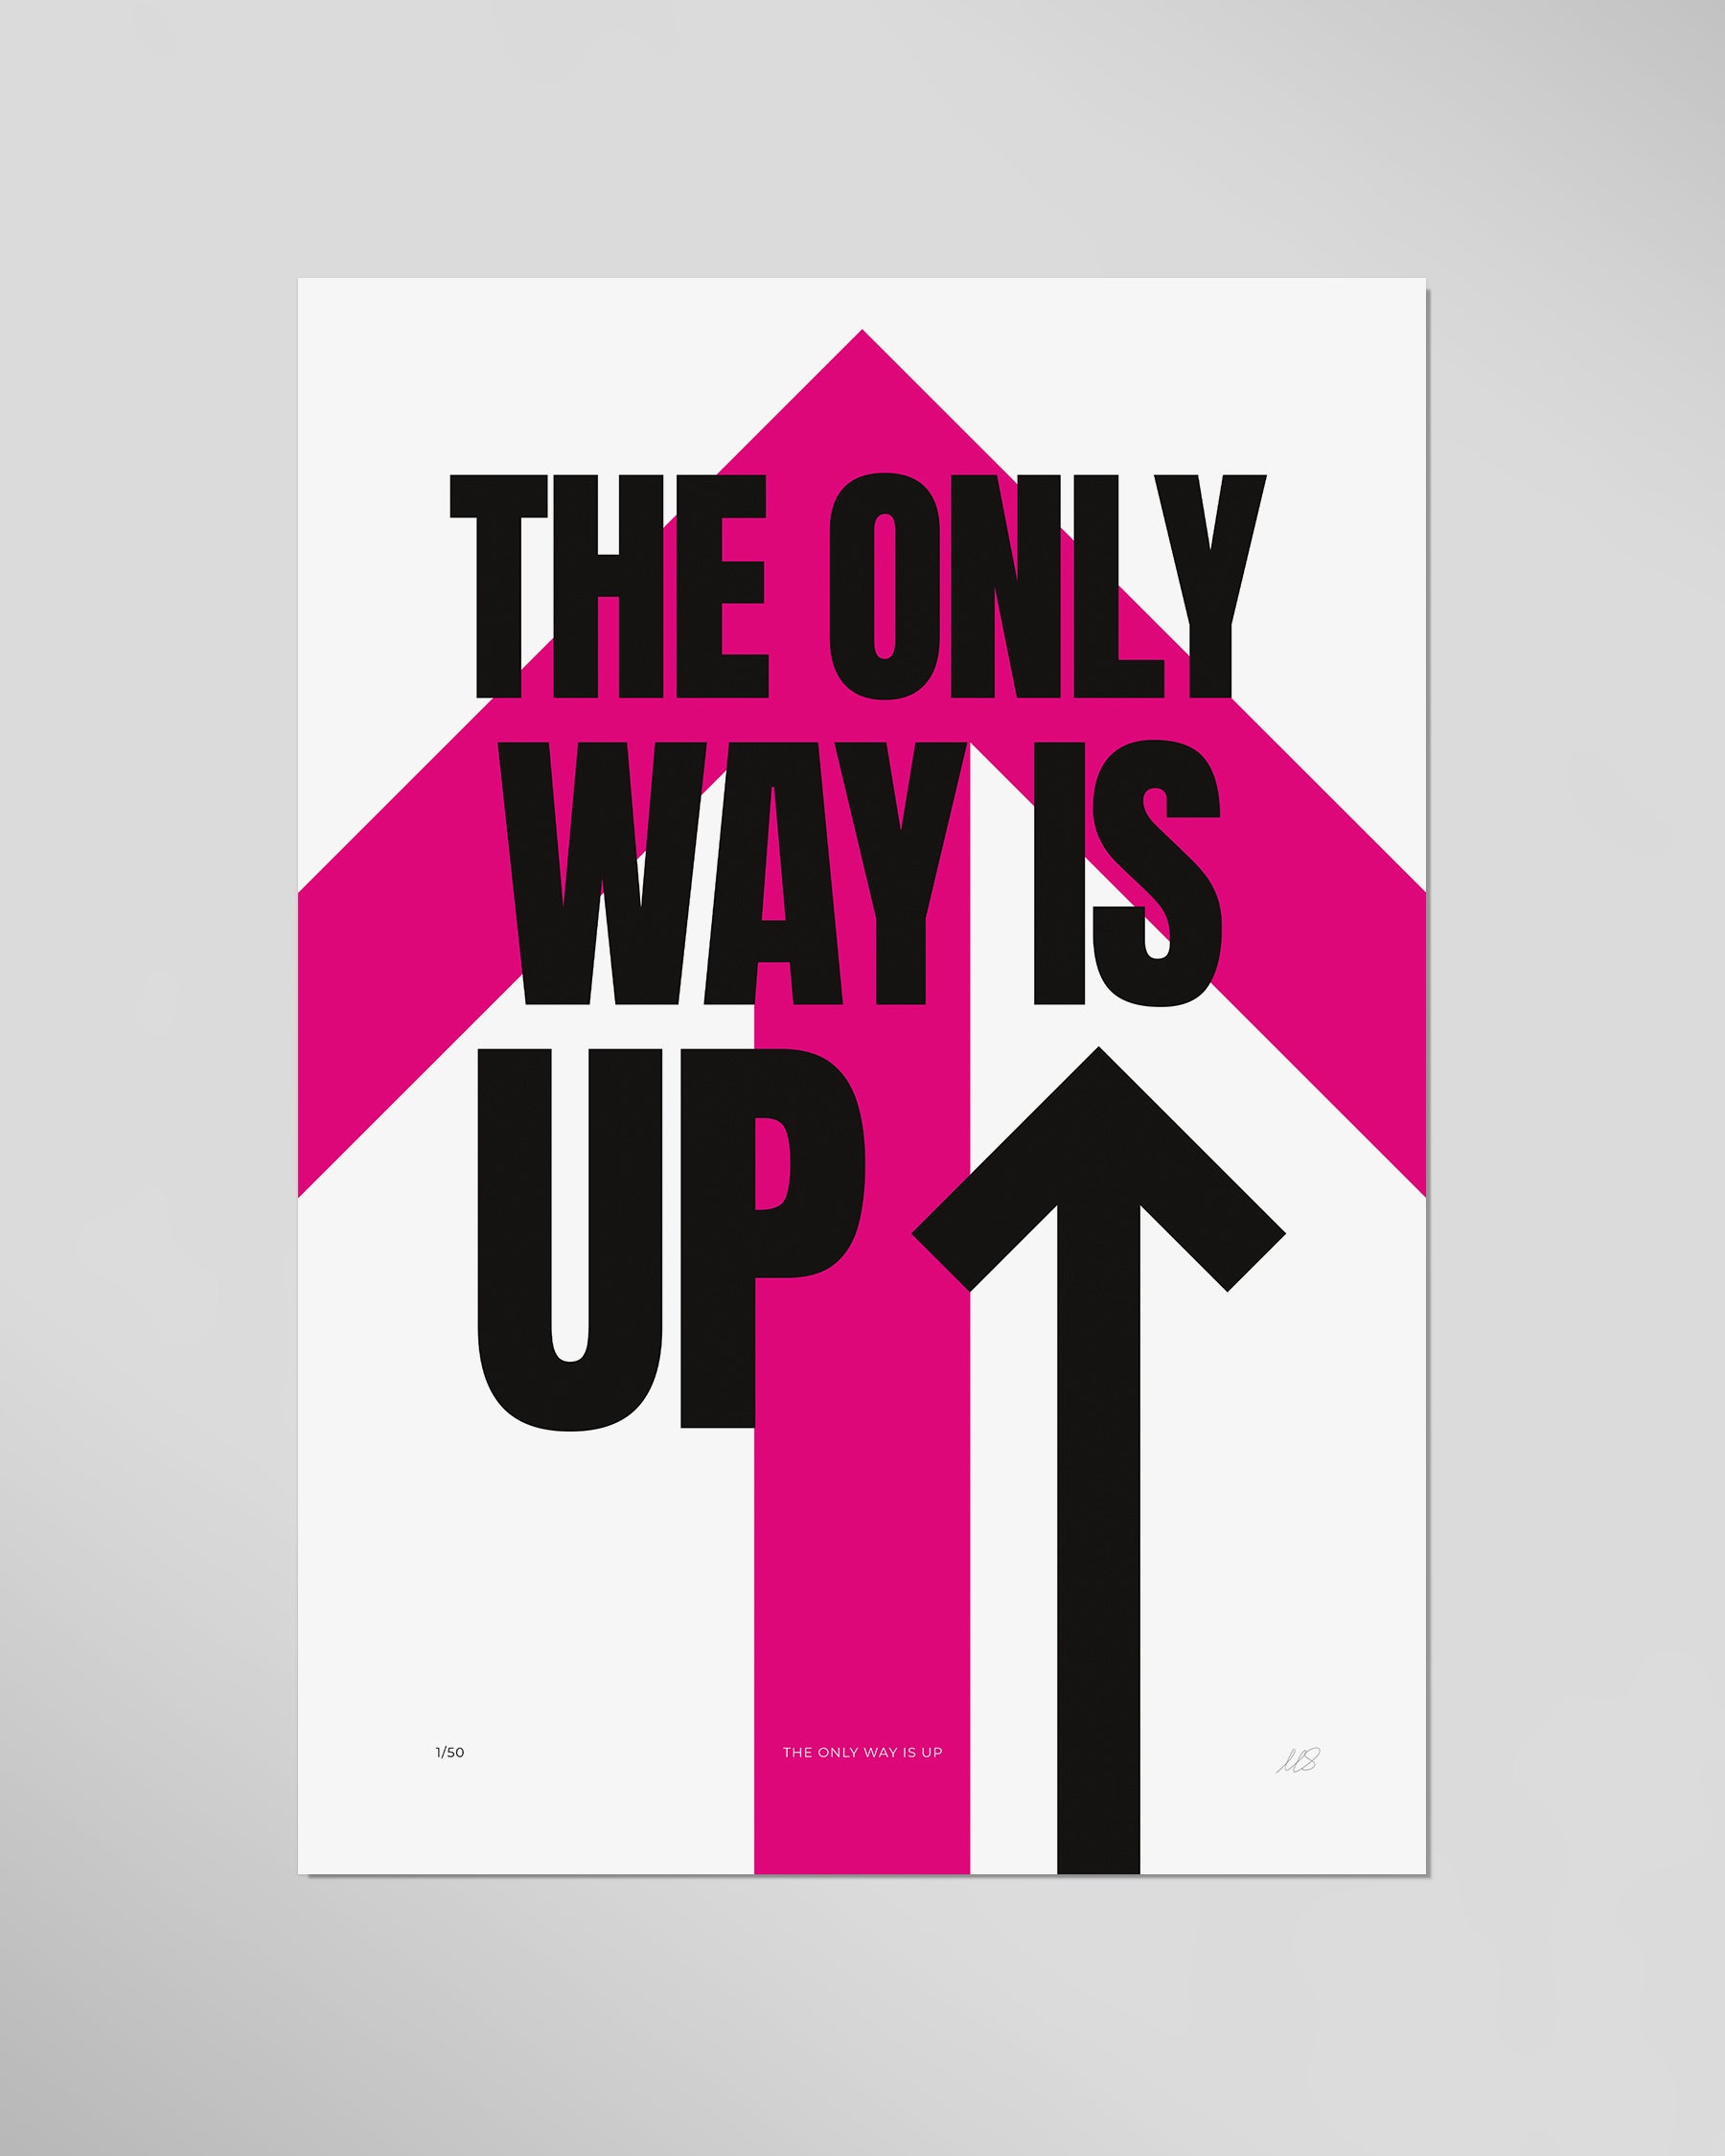 THE ONLY WAY IS UP